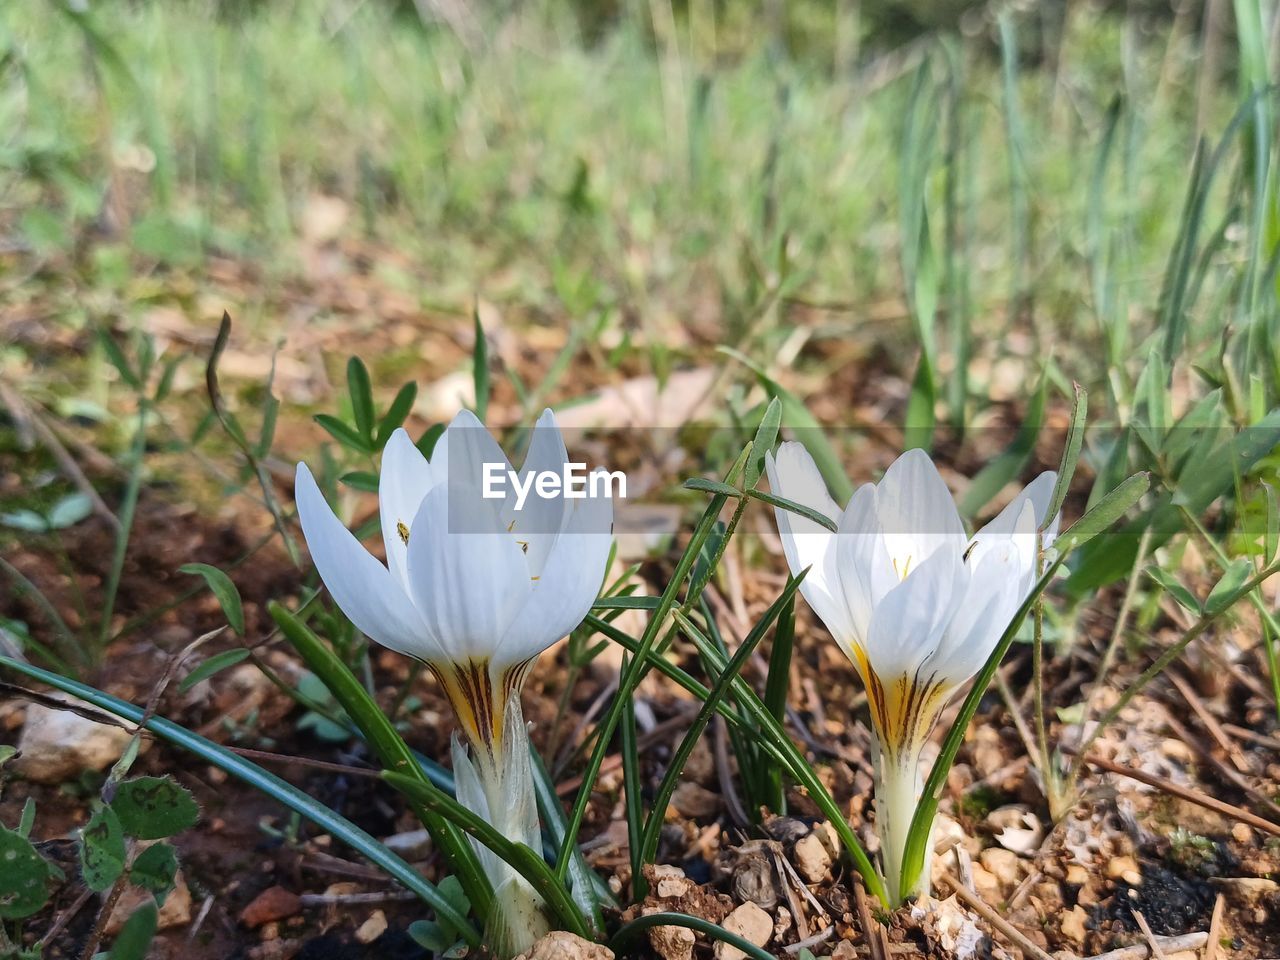 plant, flower, flowering plant, beauty in nature, freshness, crocus, growth, nature, white, petal, fragility, close-up, land, no people, grass, wildflower, inflorescence, flower head, focus on foreground, field, iris, day, springtime, outdoors, leaf